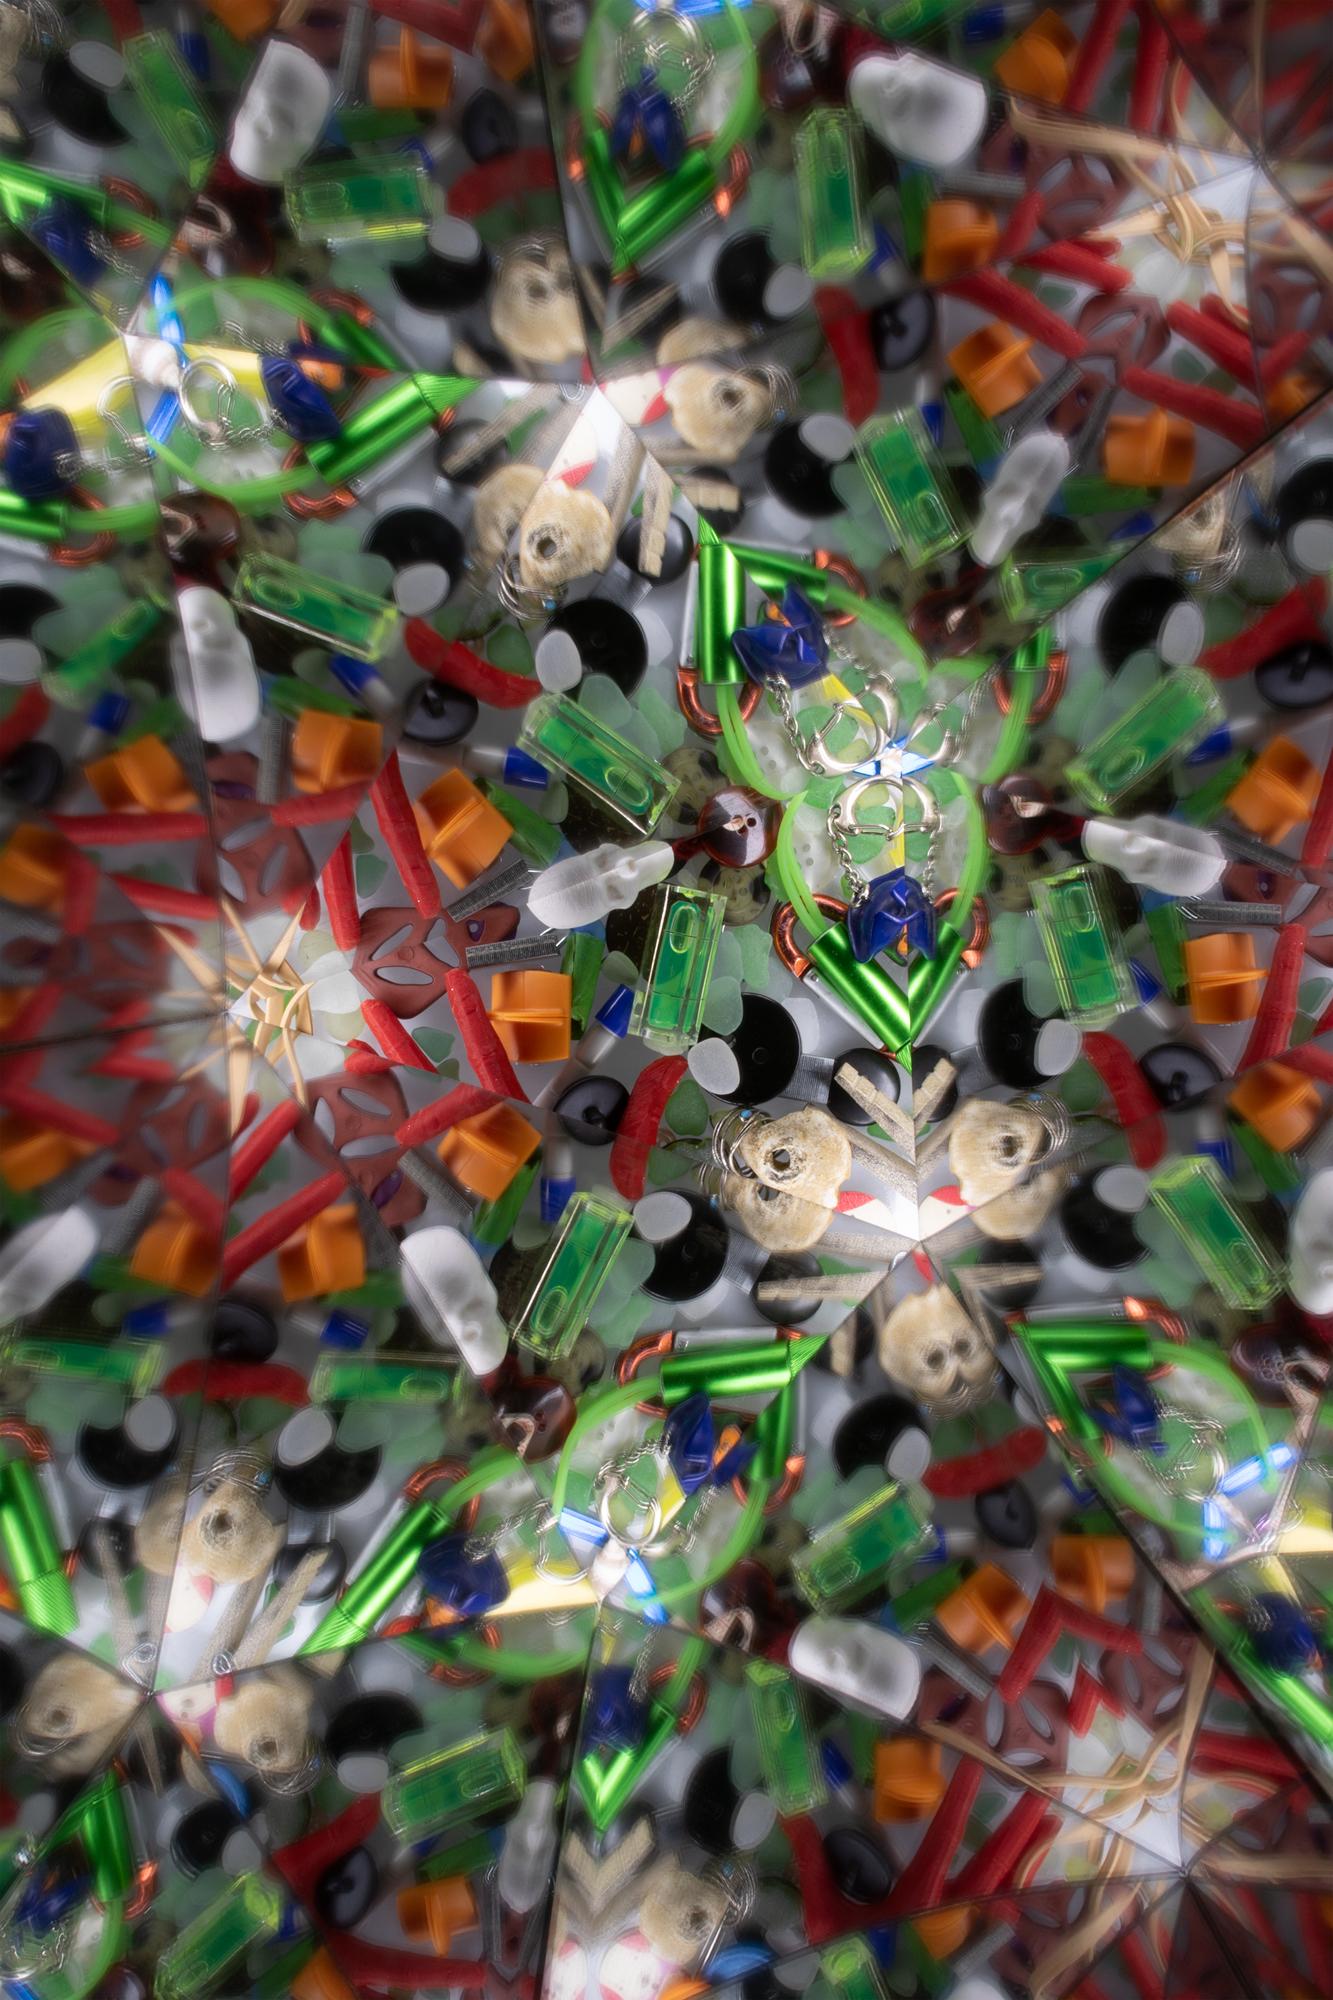 Anna Tas Color Photograph - "In Praise of Entropy (Untitled #10)", Lenticular transition, Kaleidoscope photo